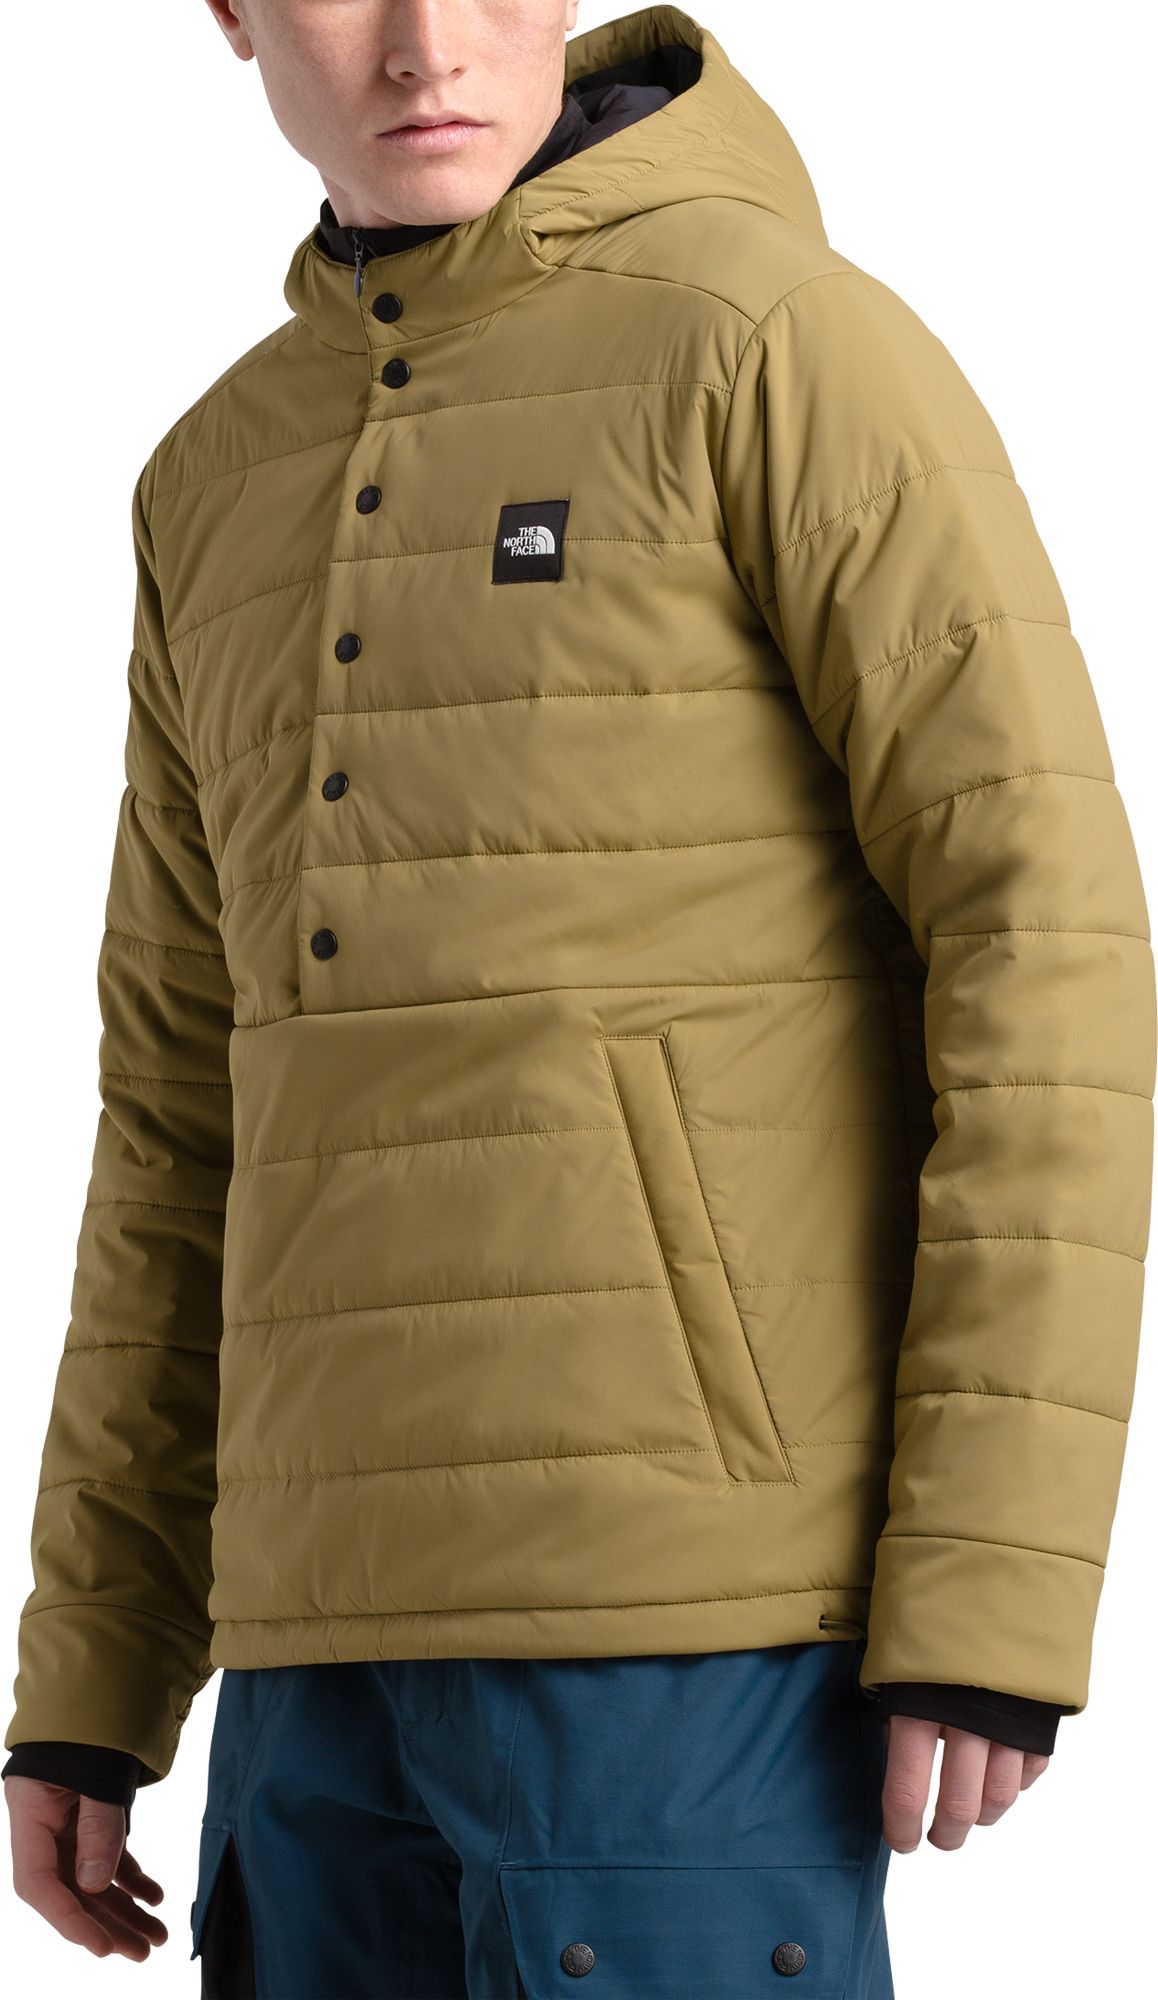 the north face men's insulated jacket